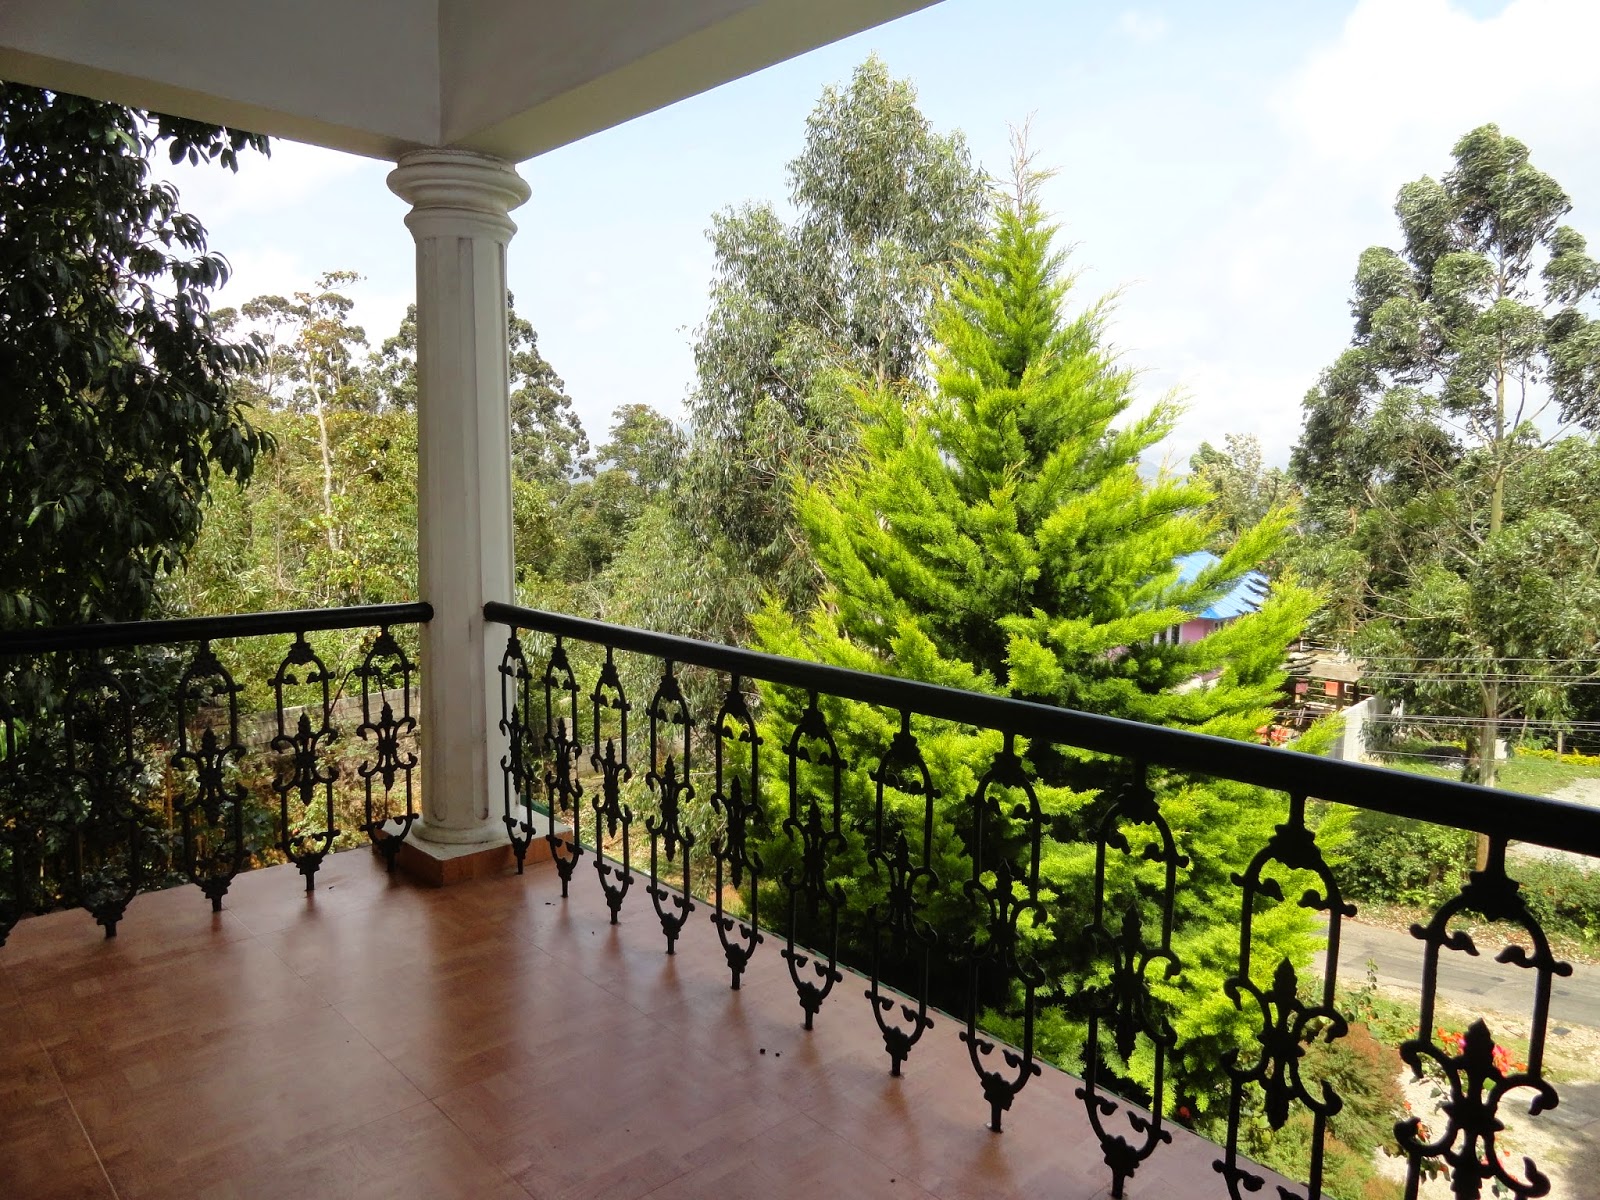 munnar cottages price, munnar cottages accommodation, munnar cottages online booking